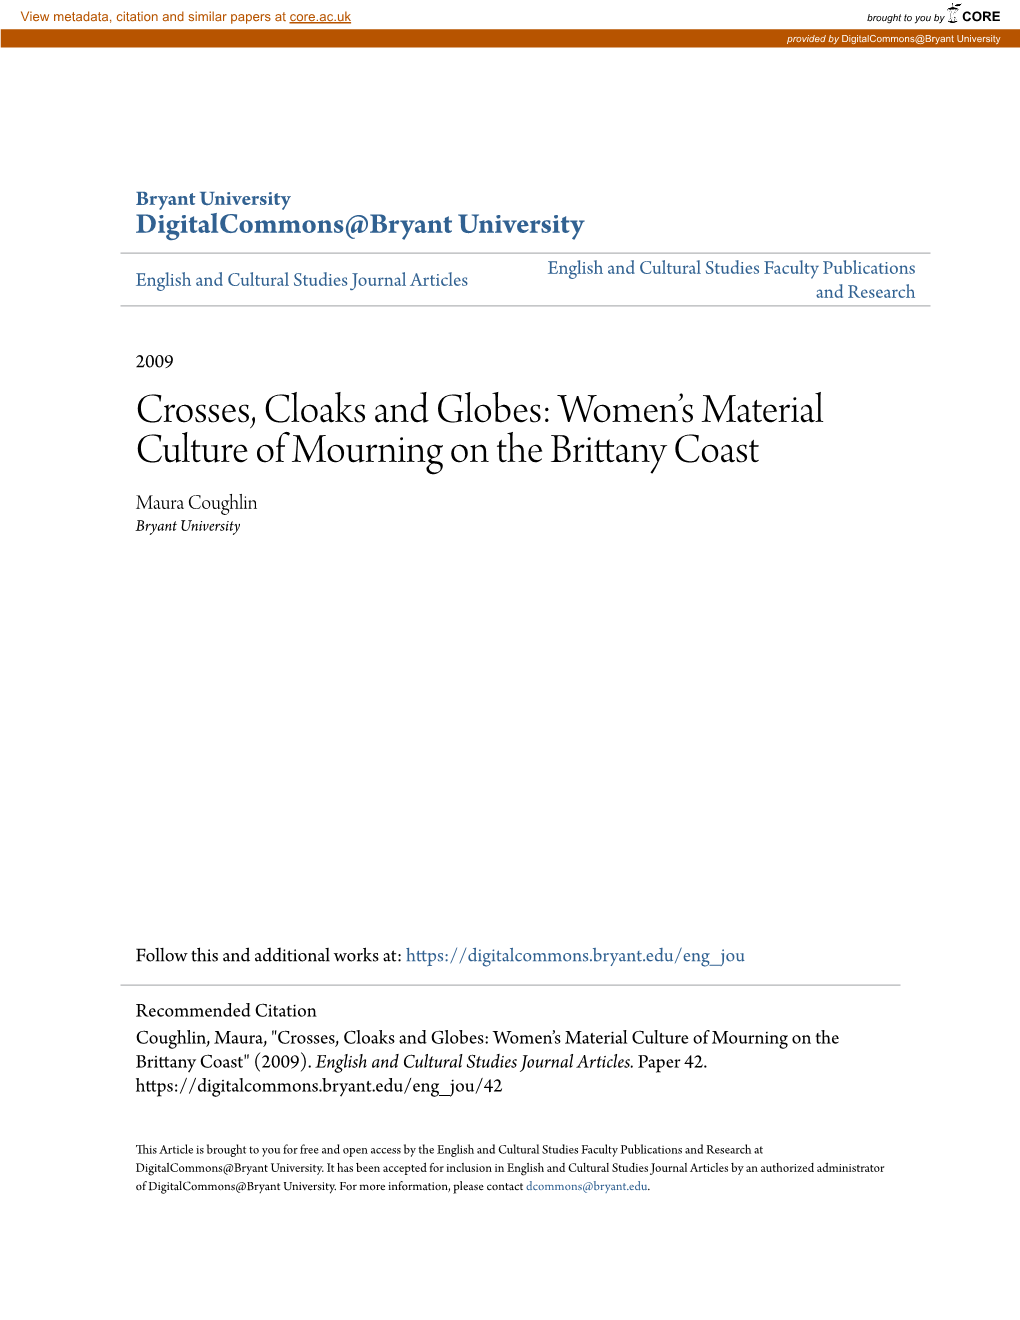 Crosses, Cloaks and Globes: Women’S Material Culture of Mourning on the Brittany Coast Maura Coughlin Bryant University